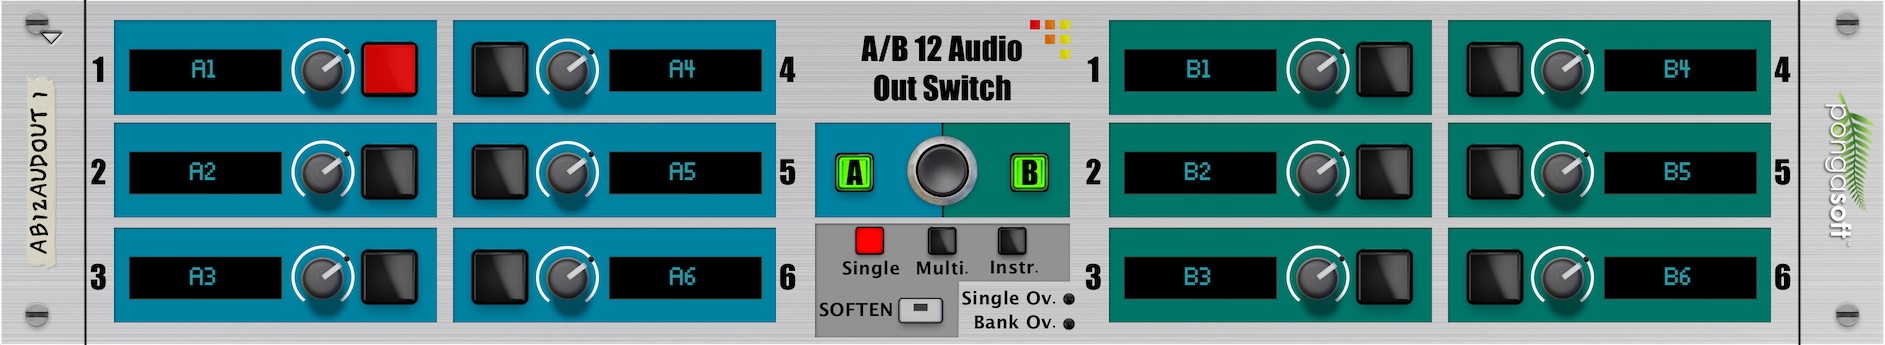 A/B 12 Audio Out Switch (Front)